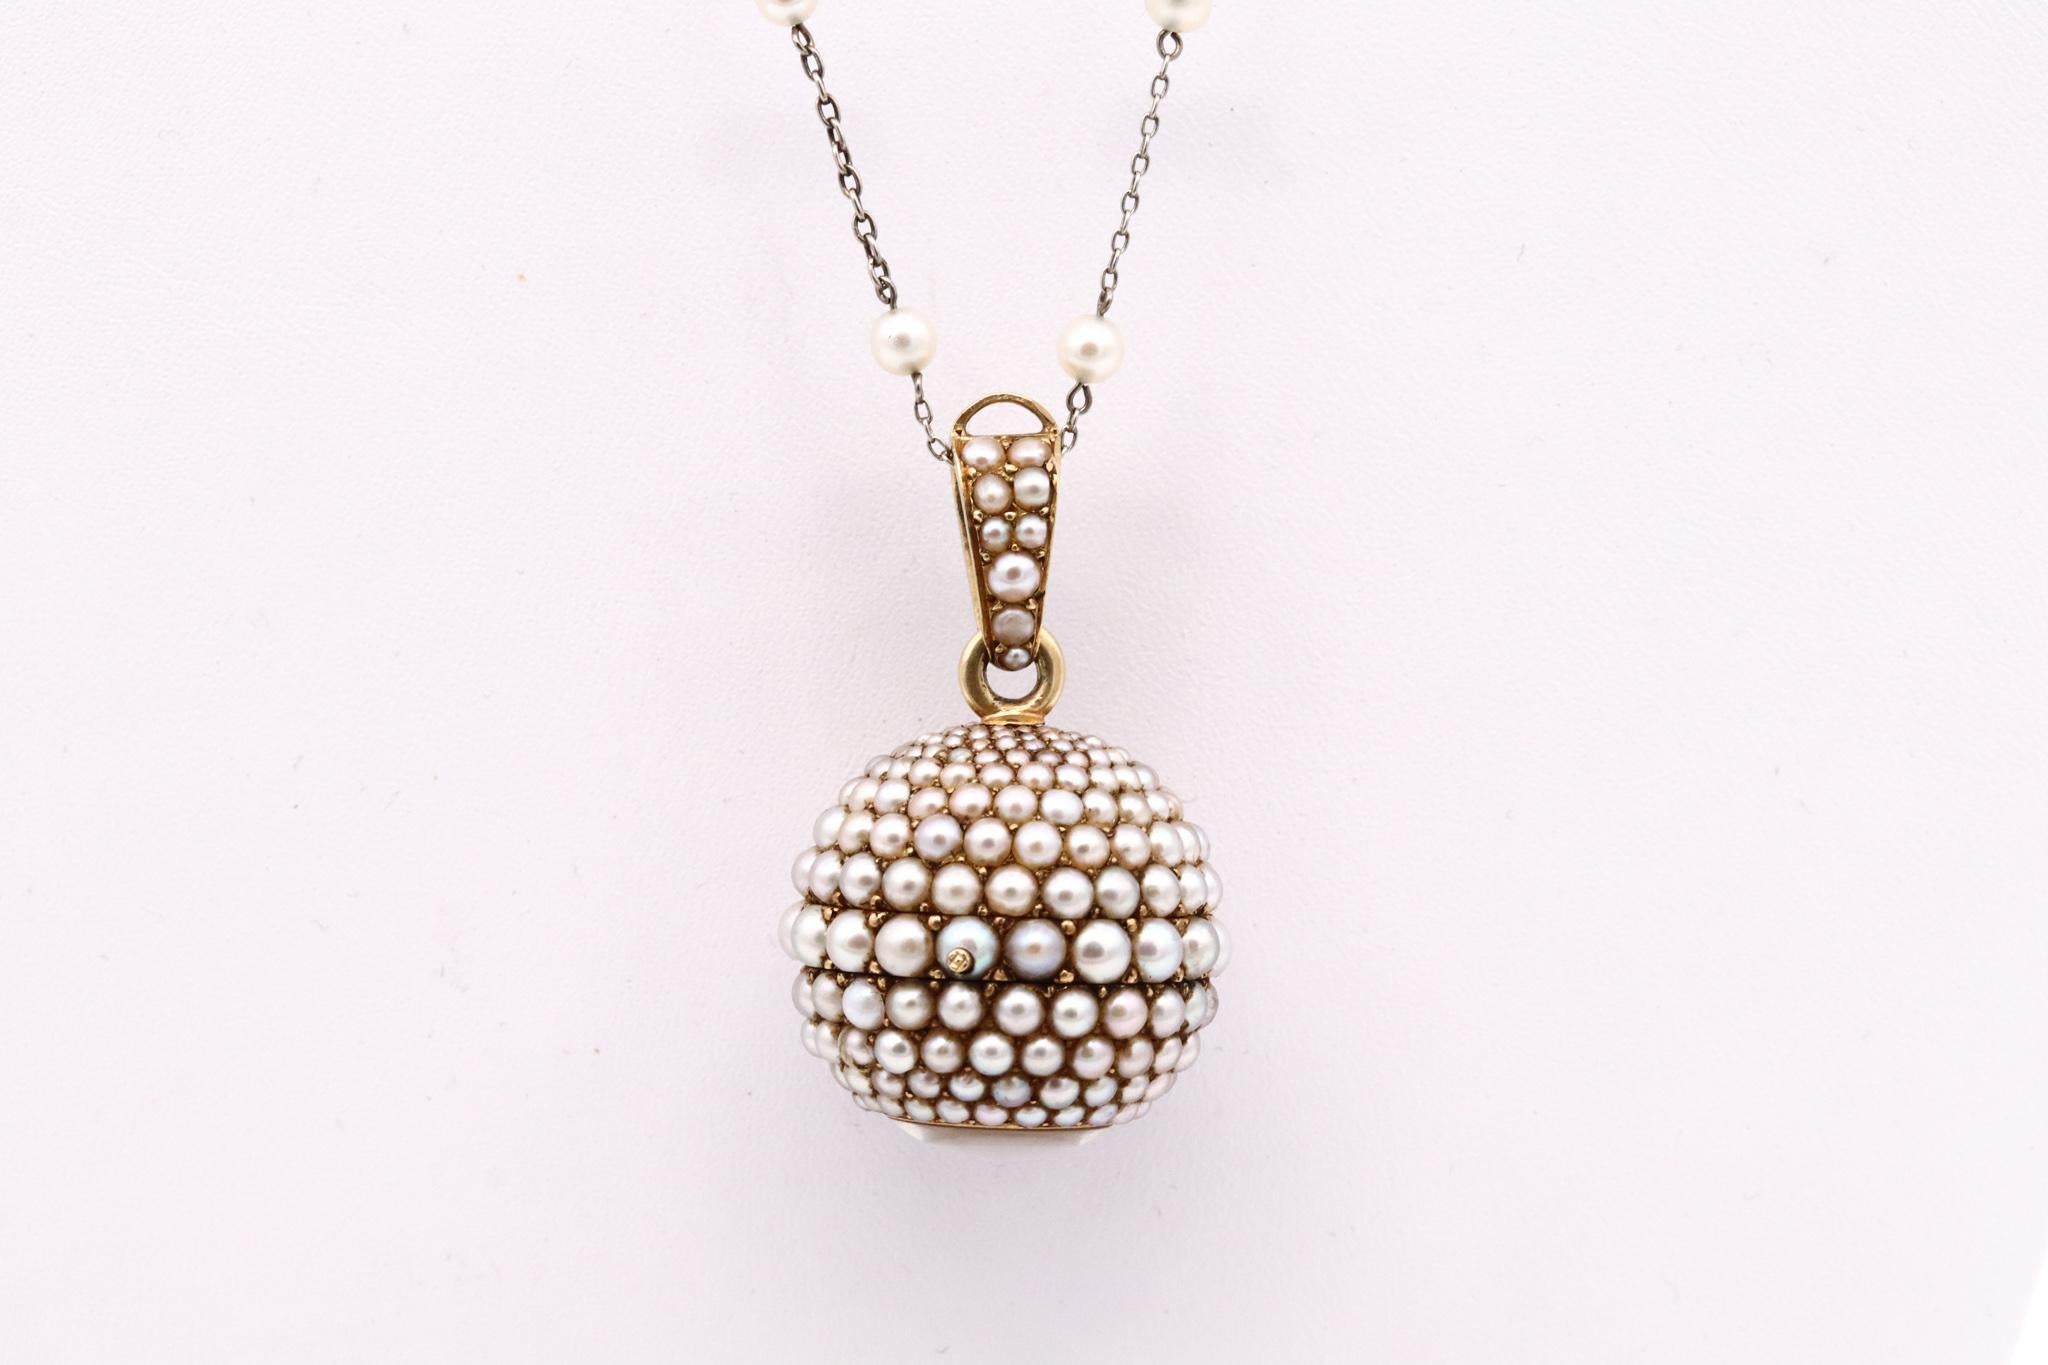 Art Deco 1930 European Spherical Watch Pendant In 18Kt Gold With Gradated Pearls 2